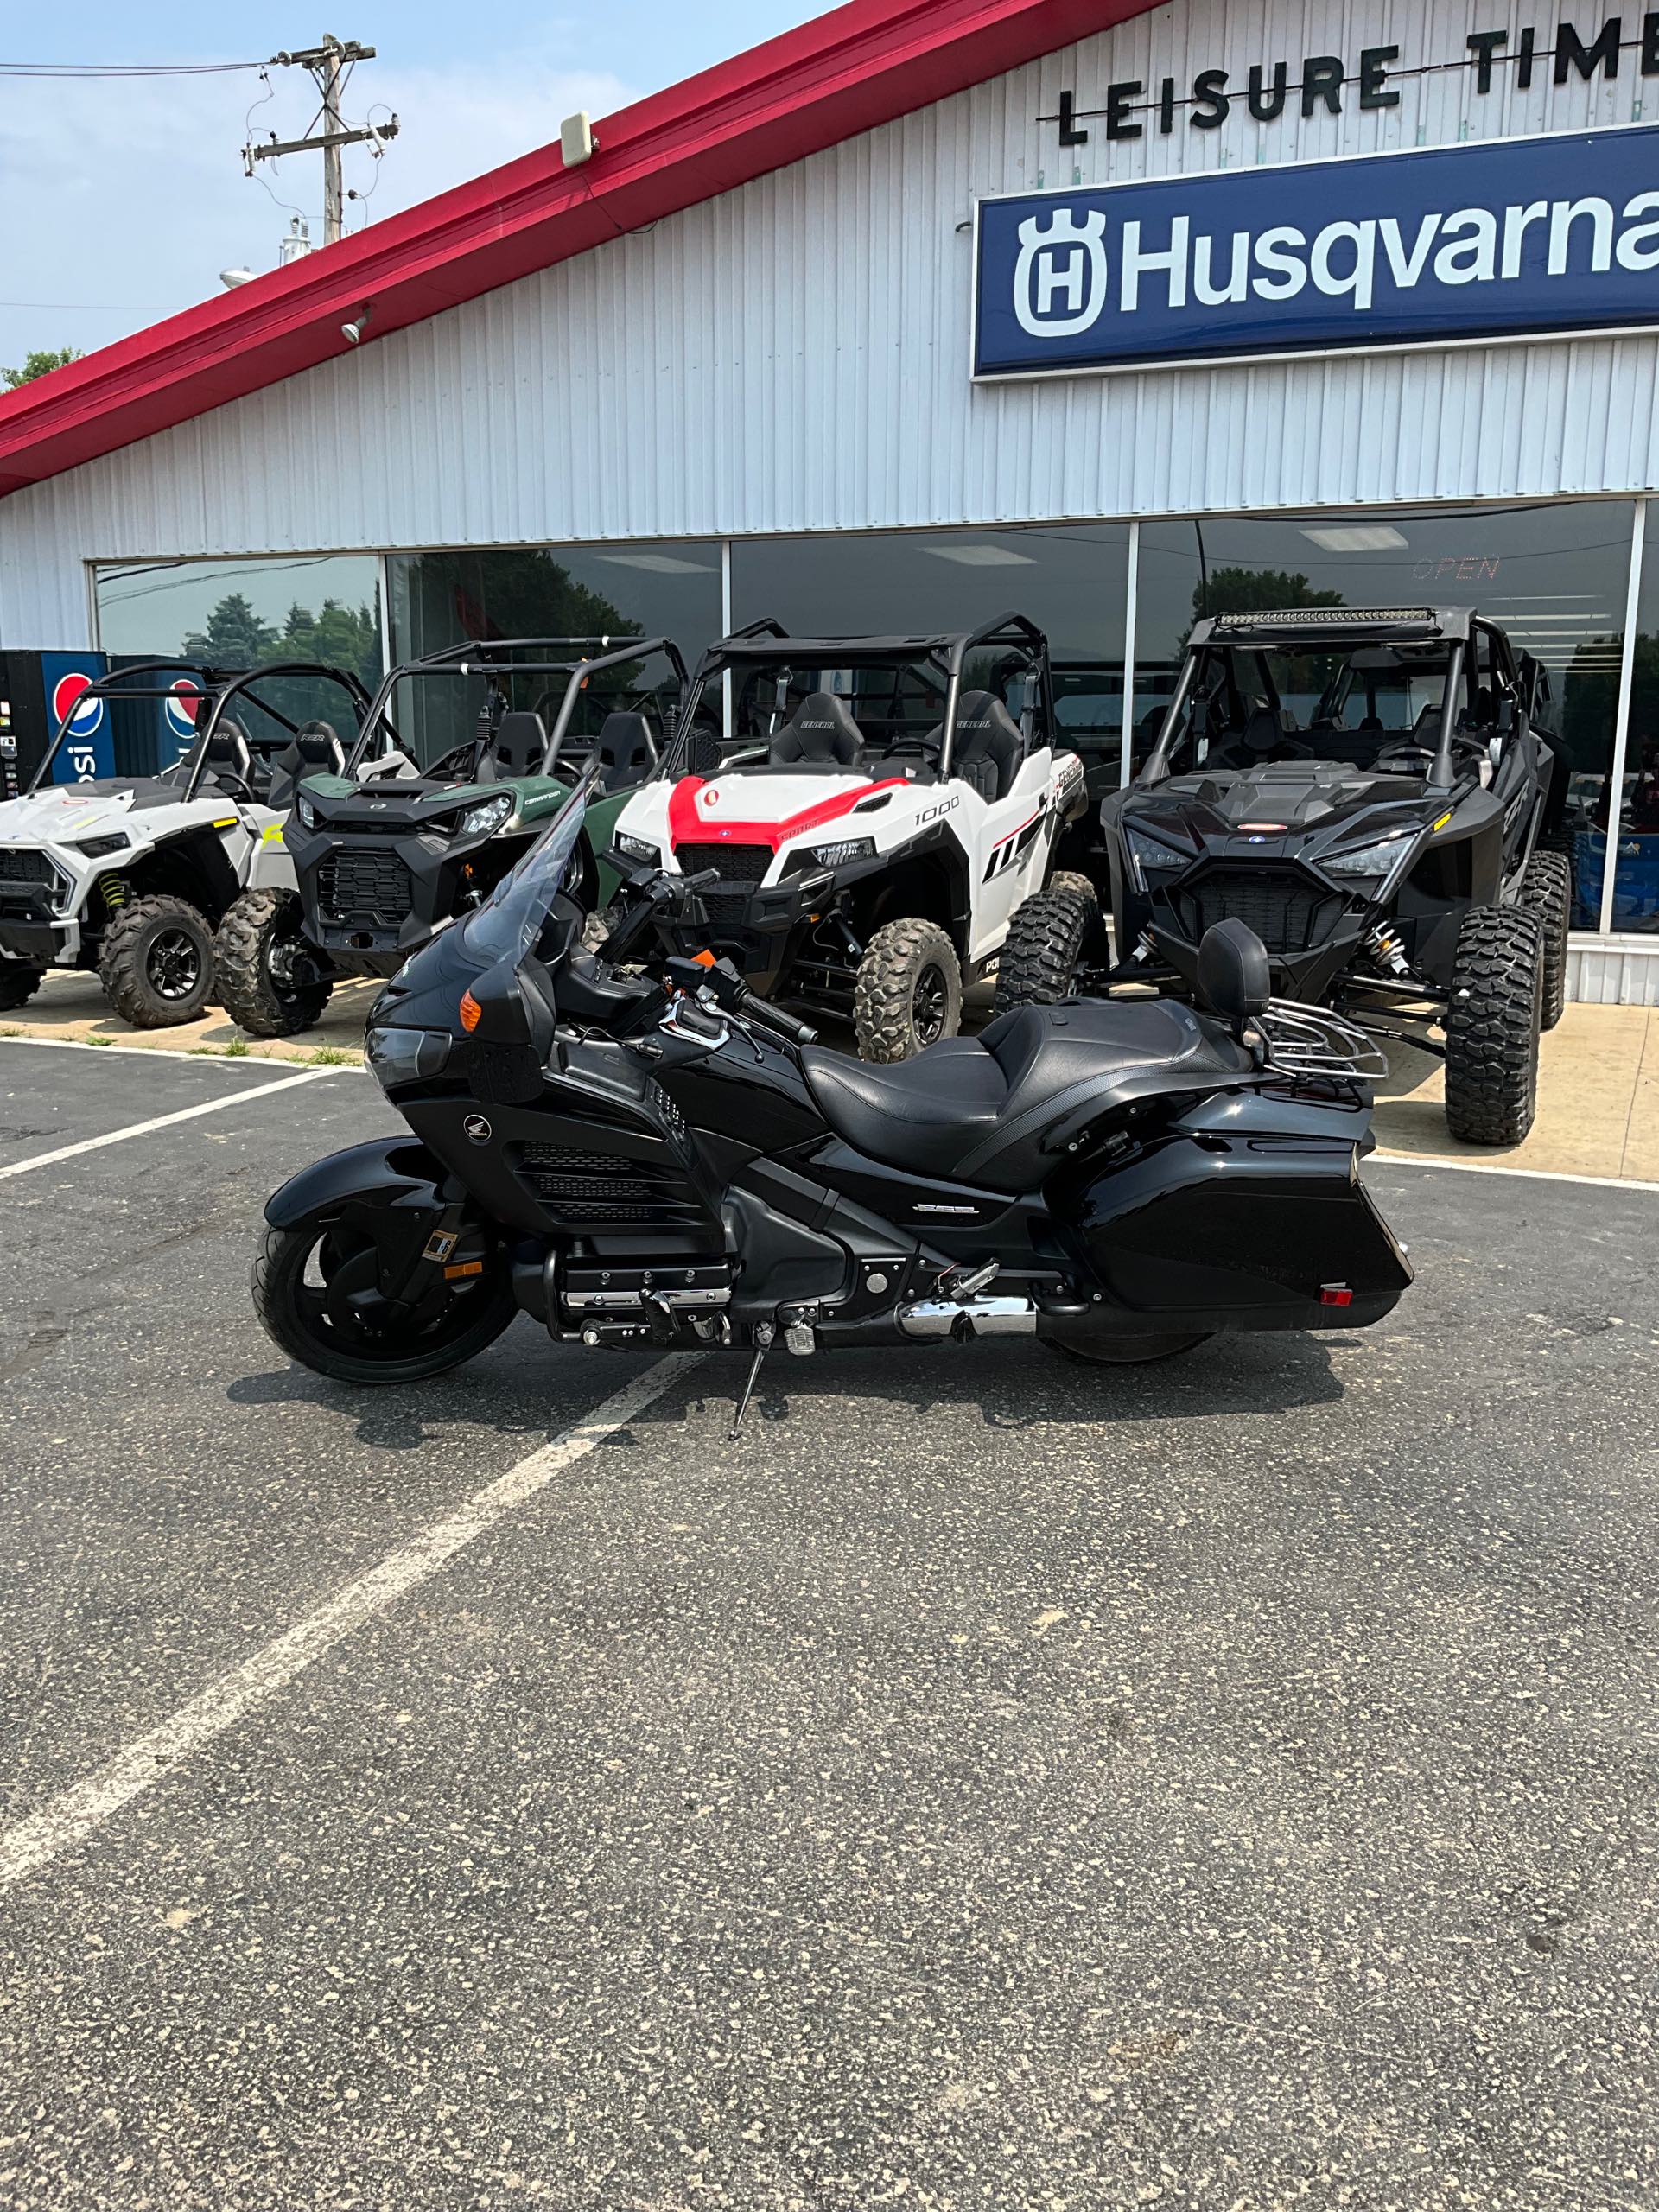 2013 Honda Gold Wing F6B at Leisure Time Powersports of Corry